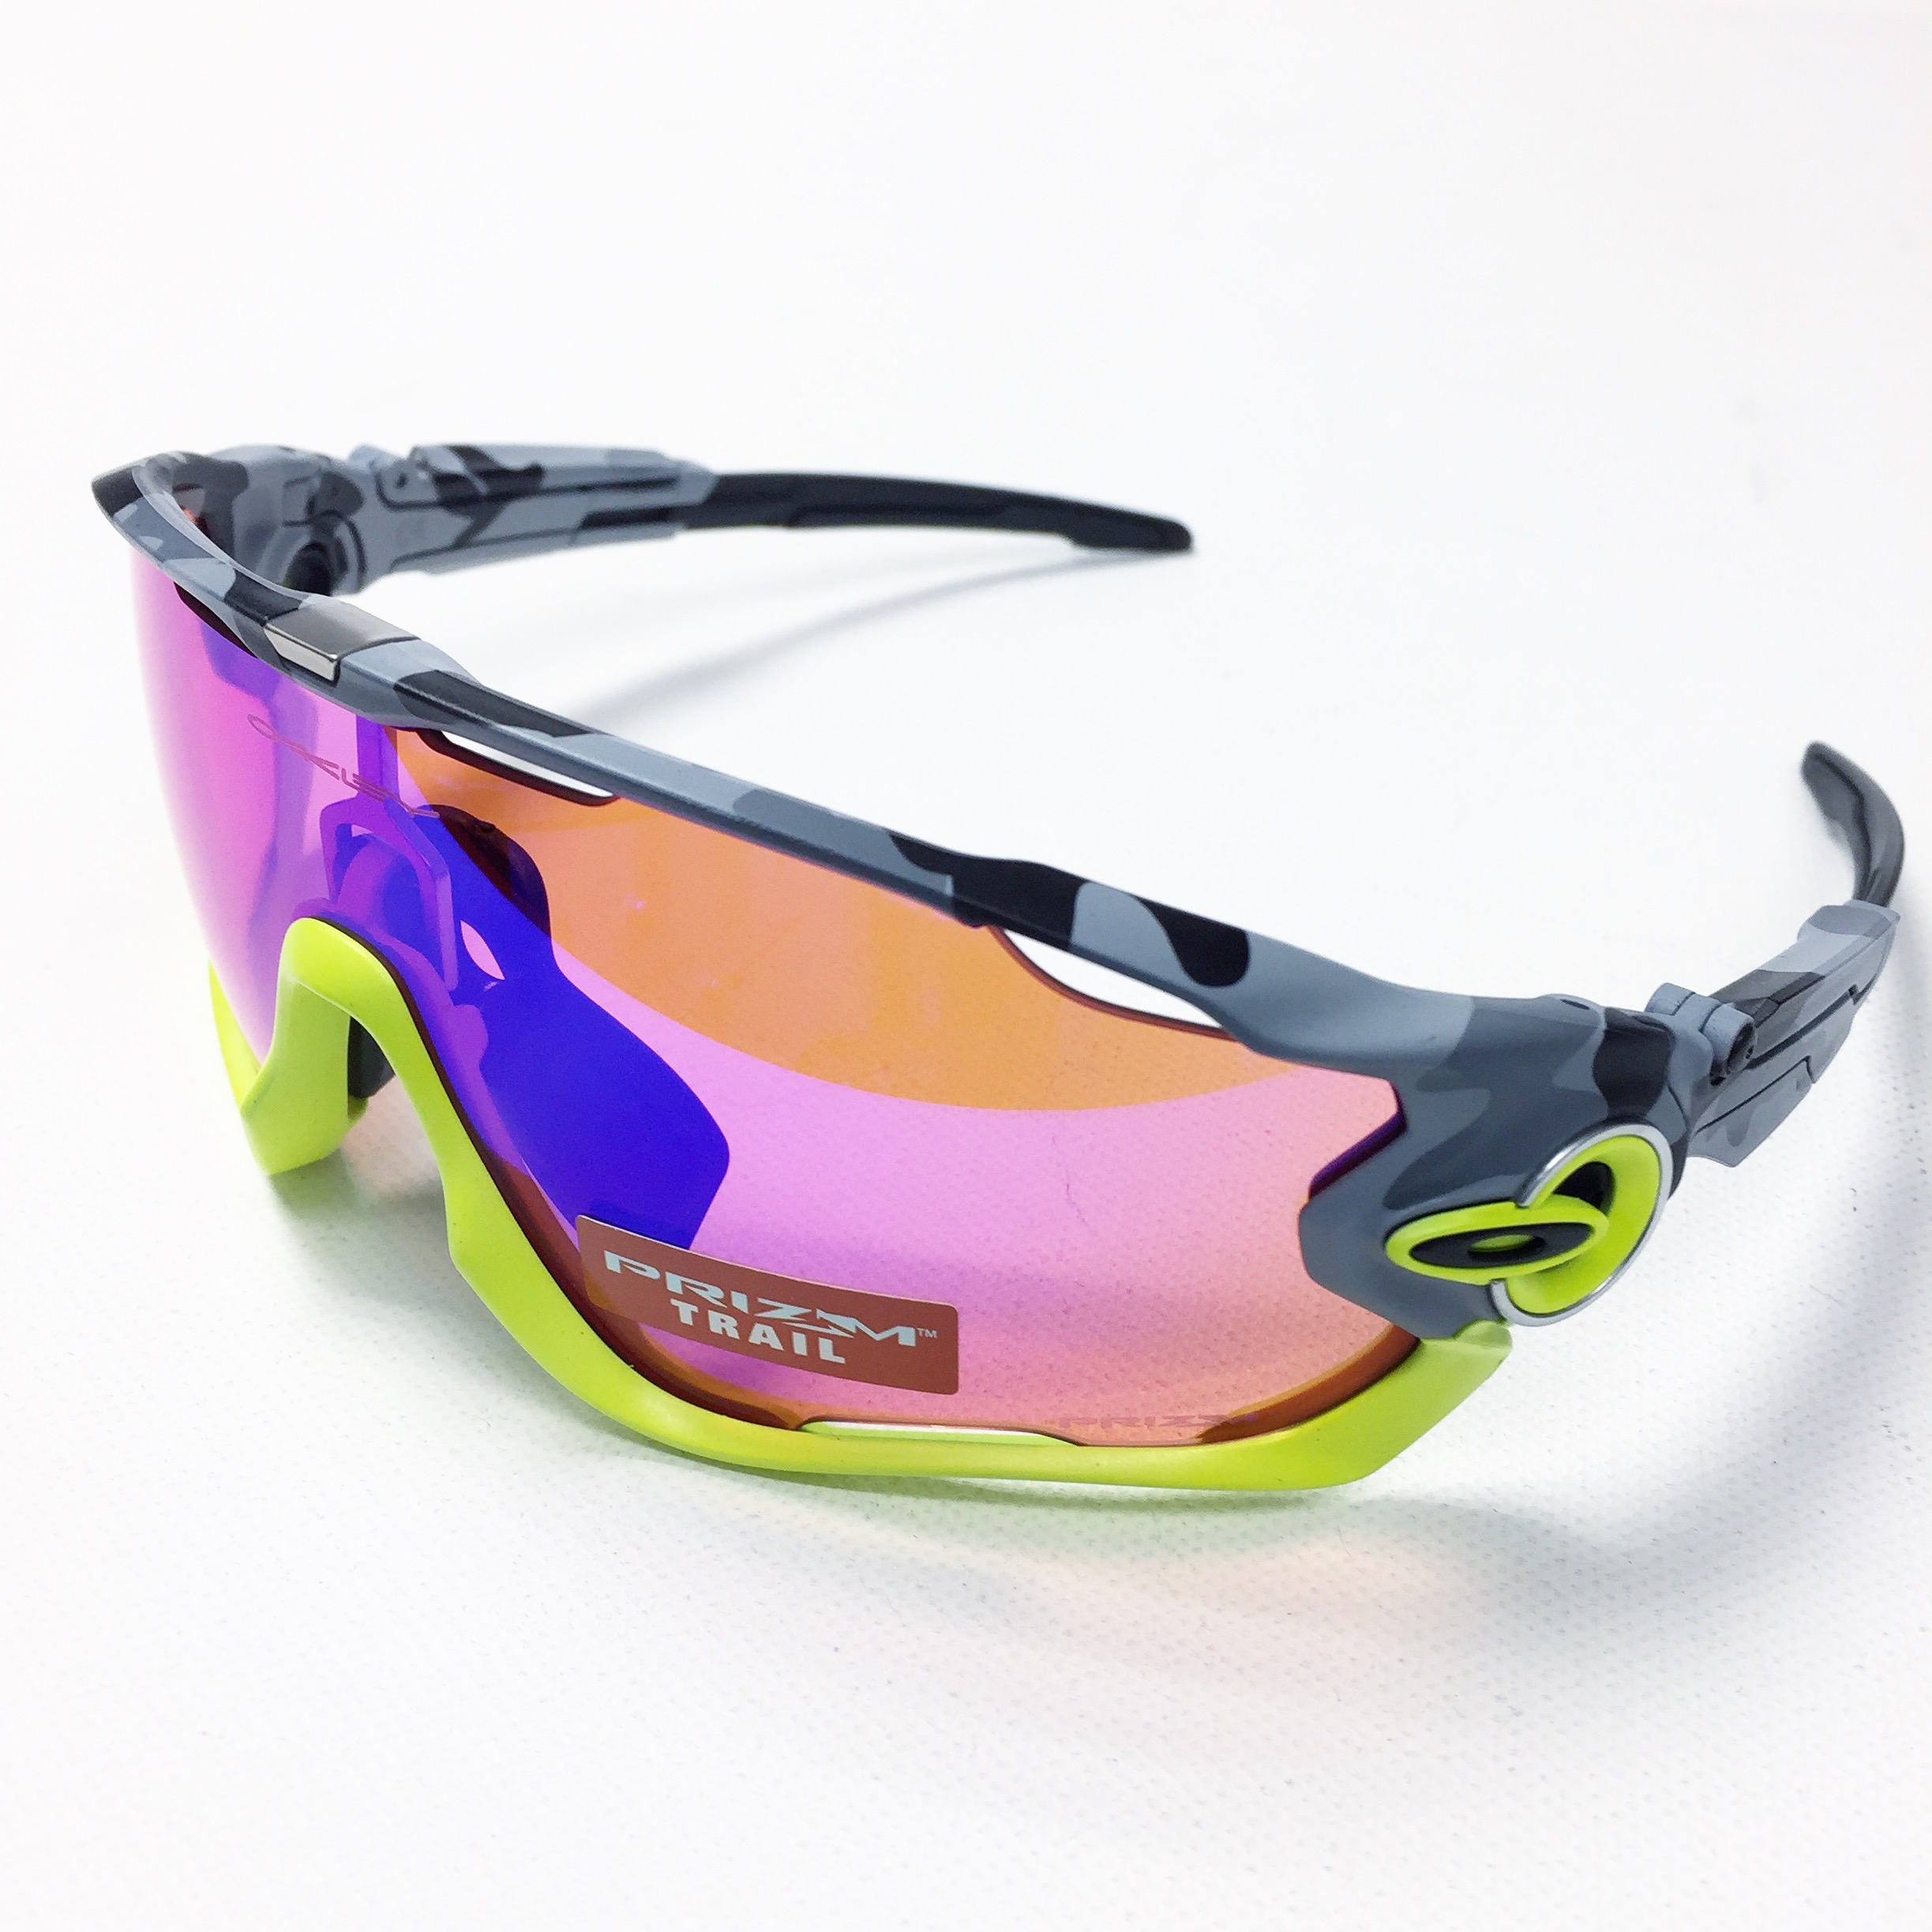 customize your own oakleys, OFF 72%,Buy!